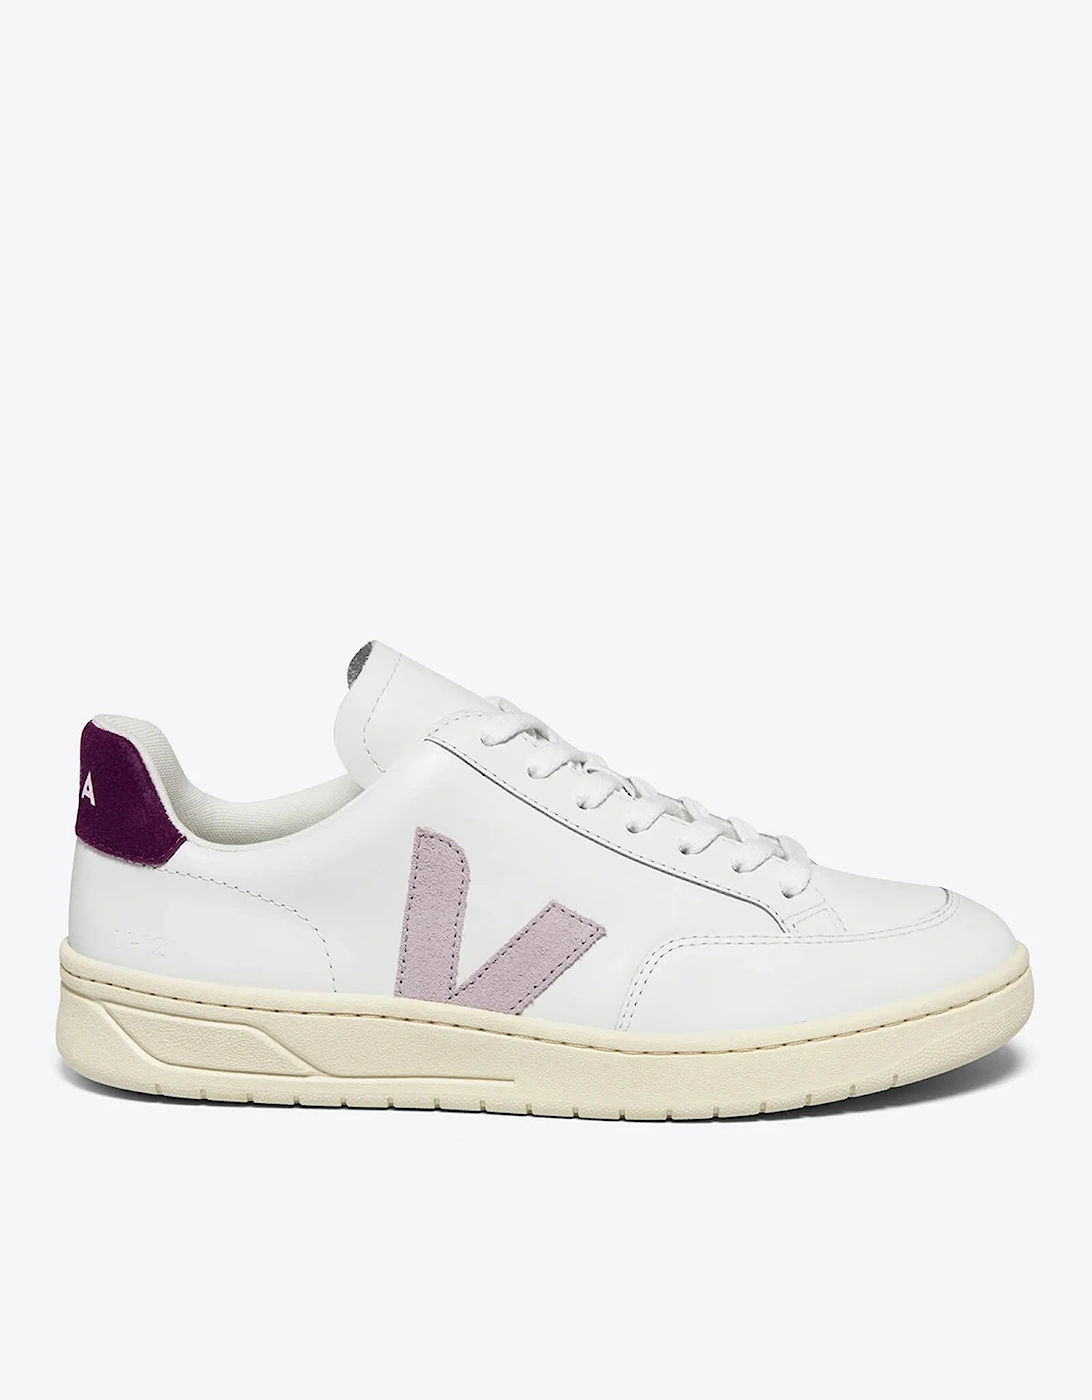 Women's V-12 Leather Trainers - - Home - Women's V-12 Leather Trainers